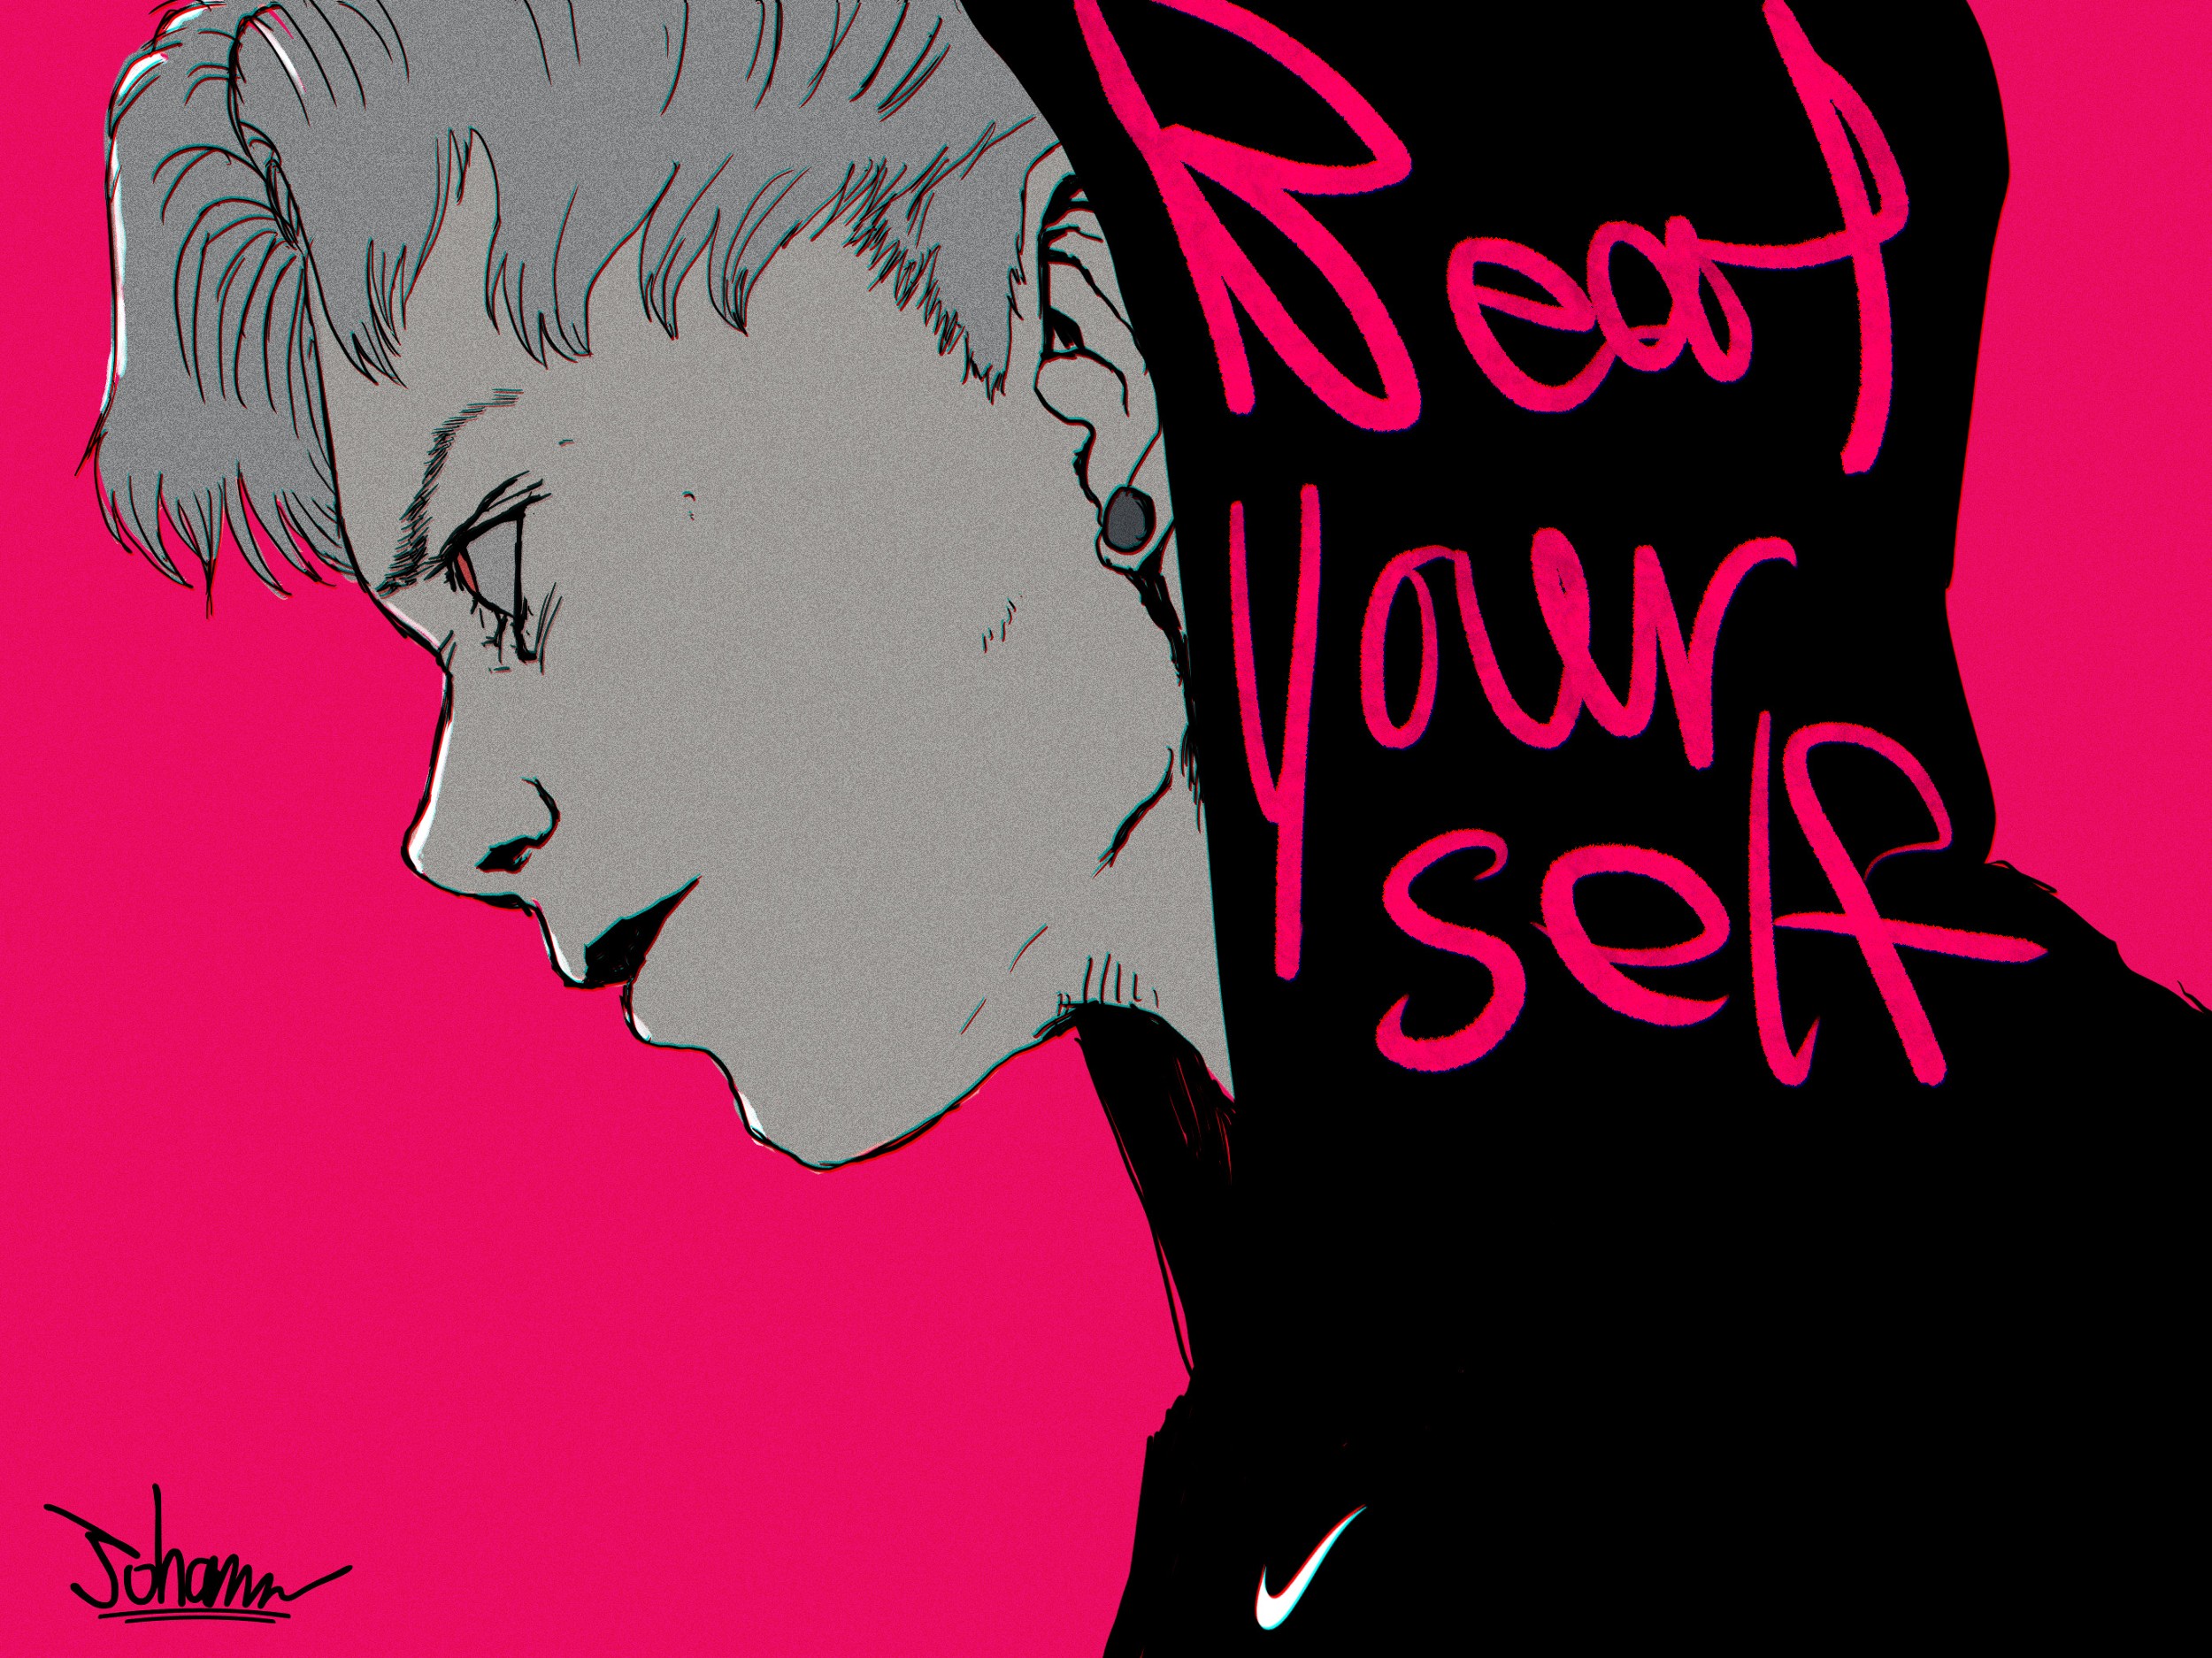 Beat yourself